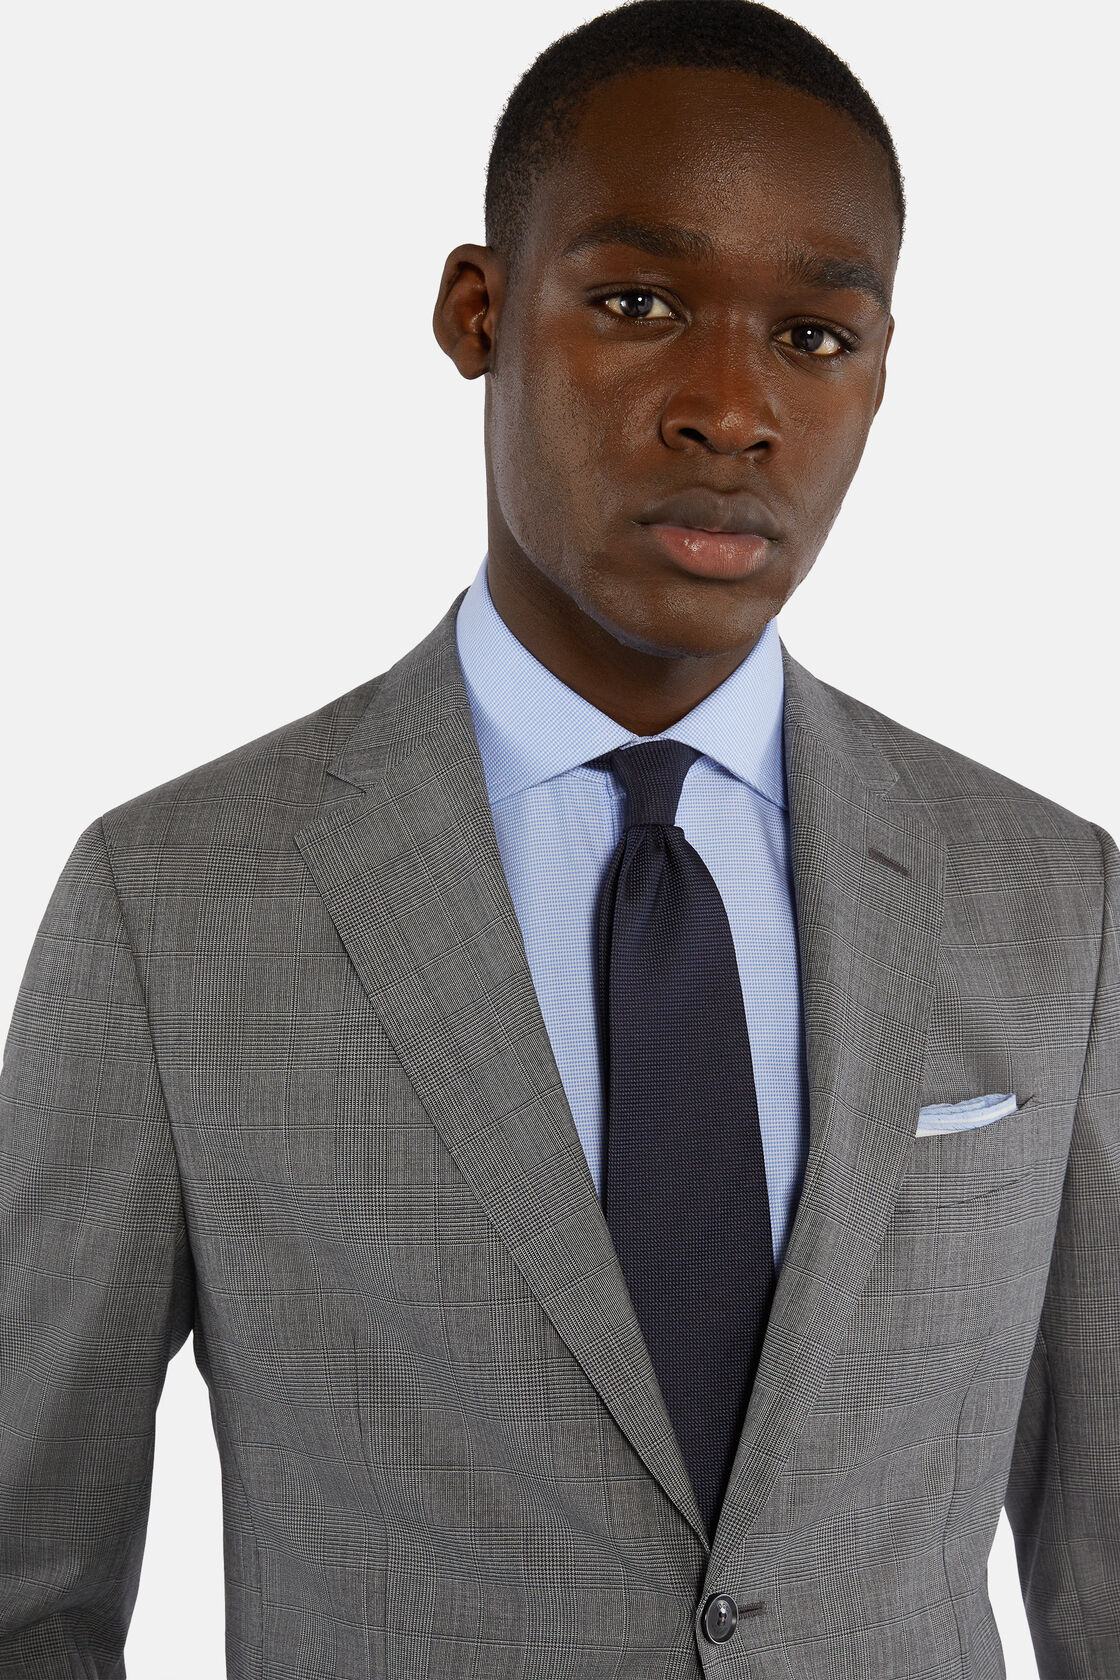 Grey Prince of Wales Check Suit In Pure Wool, Grey, hi-res